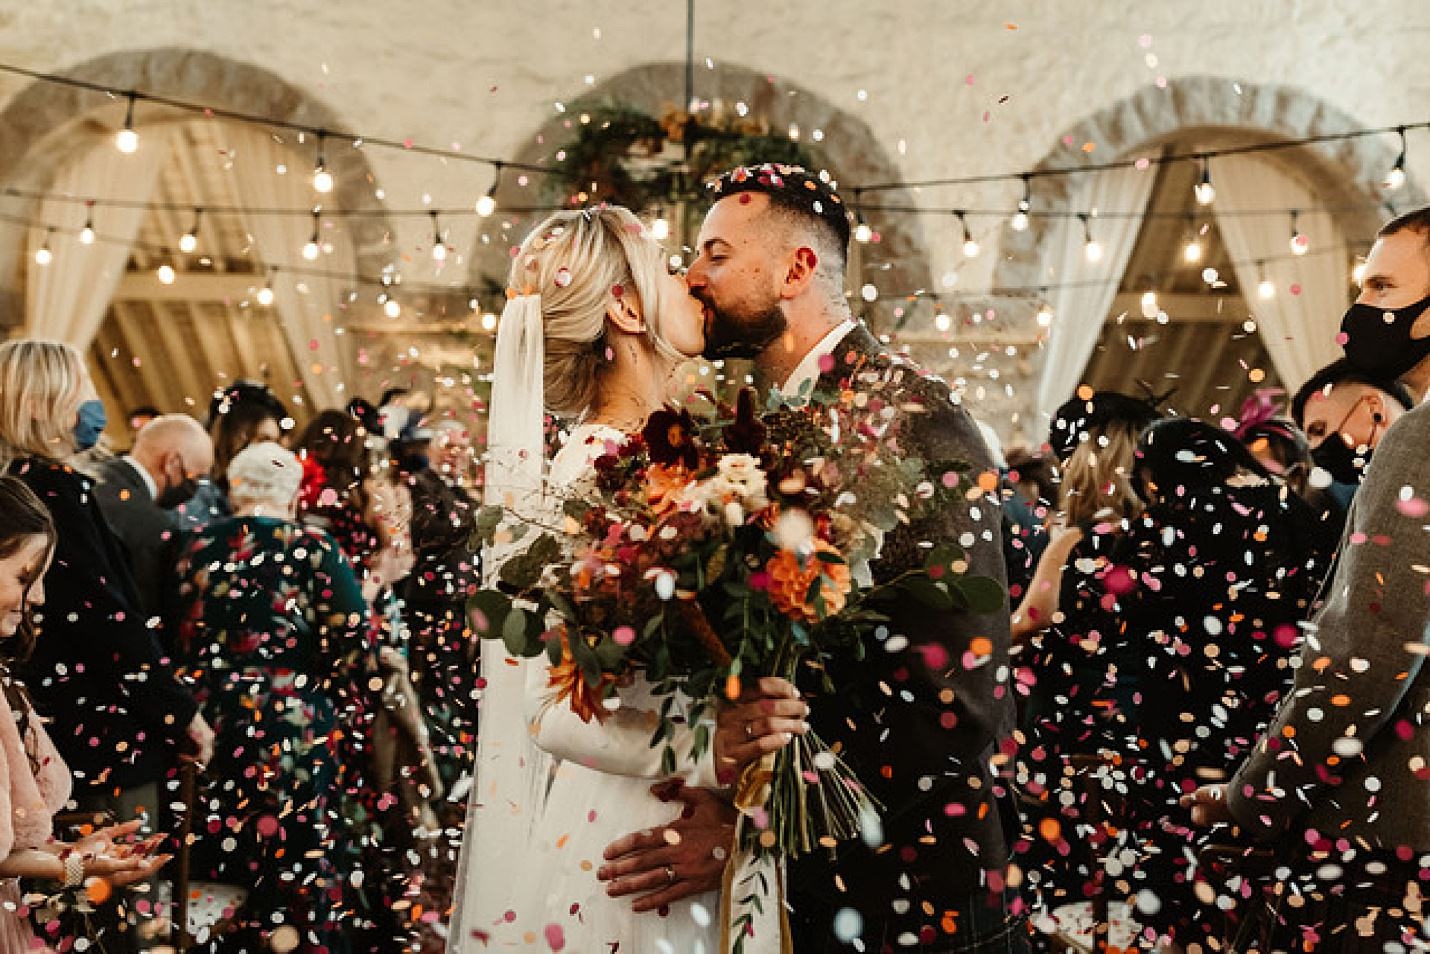 photo of bride and groom kissing as wedding guests throw confetti bride is holding stunning bridal bouqet by gloam emma lawson photography